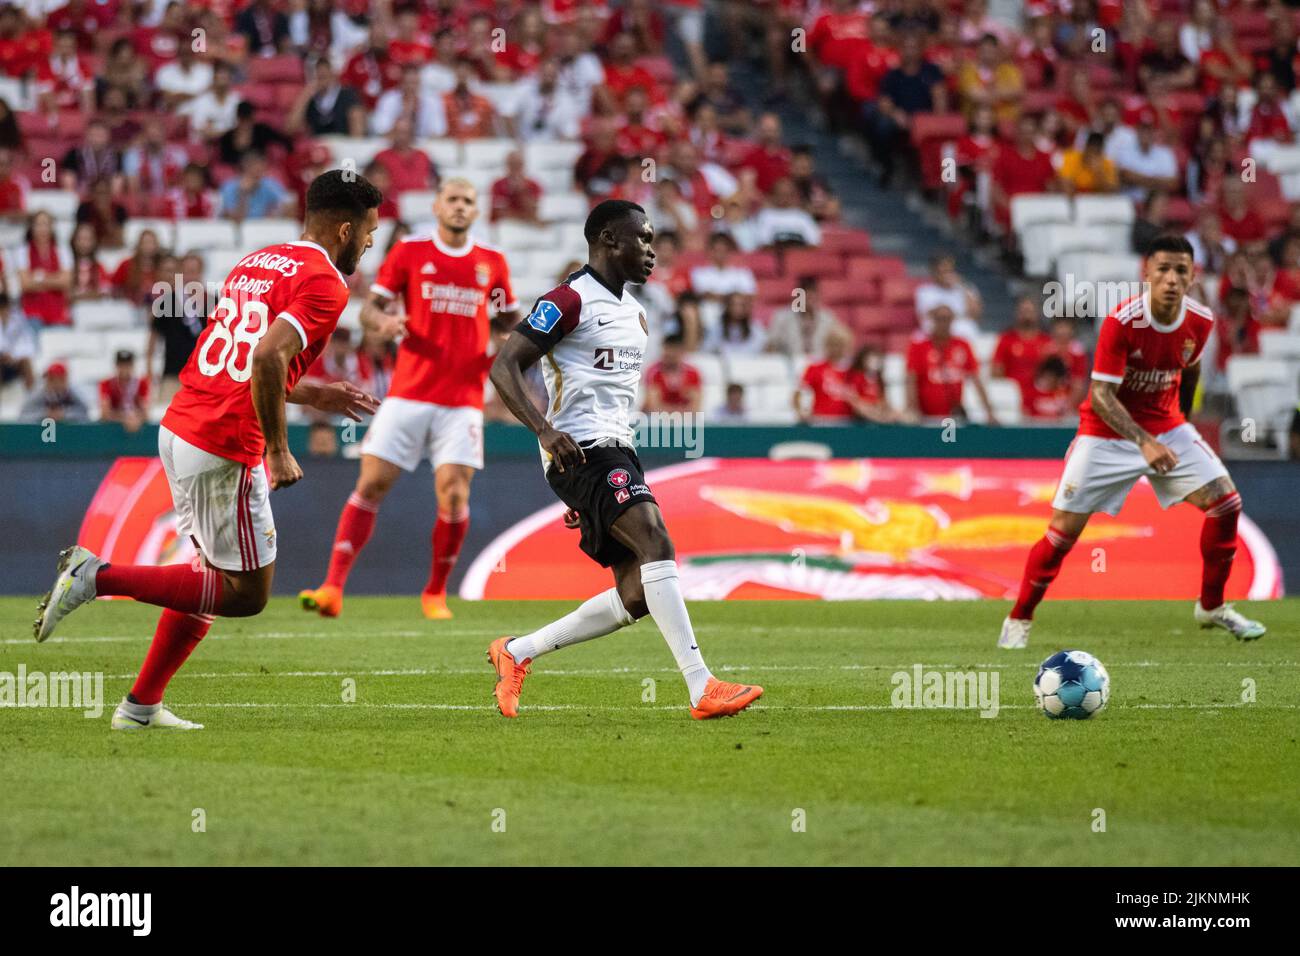 Lisbon, Portugal. 03rd Aug, 2022. Pione Sisto of FC Midtjylland (C) seen in action during the UEFA Champions League 3rd qualifying round match between SL Benfica and FC Midtjylland at Estadio da Luz stadium. Final score; SL Benfica 4:1 FC Midtjylland. Credit: SOPA Images Limited/Alamy Live News Stock Photo